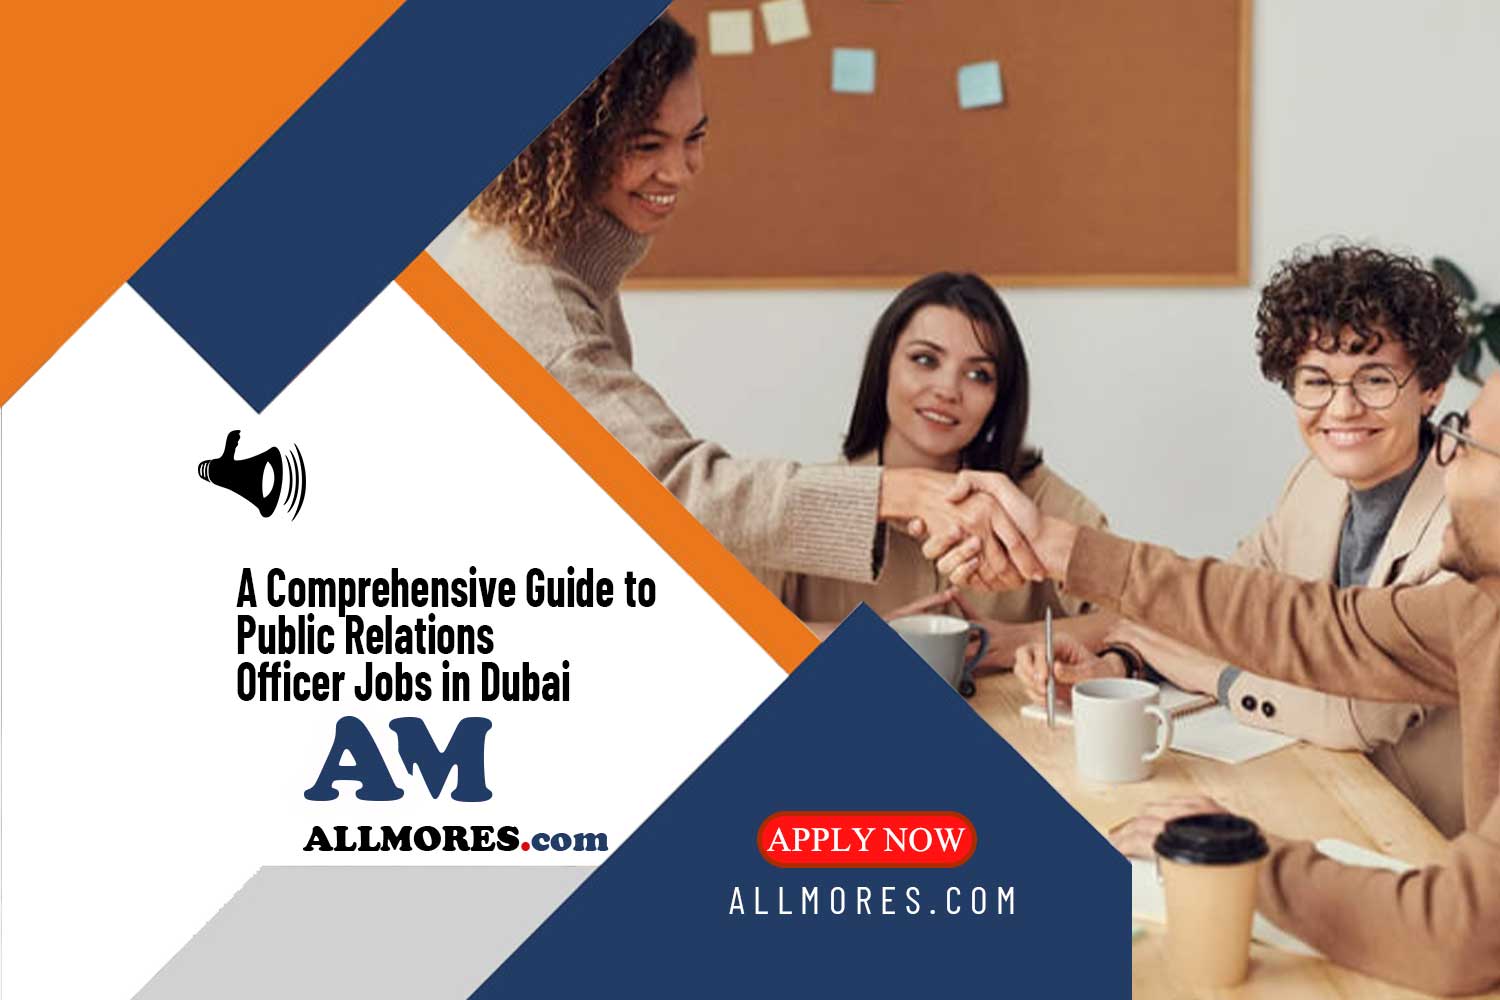 A Comprehensive Guide to Public Relations Officer Jobs in Dubai